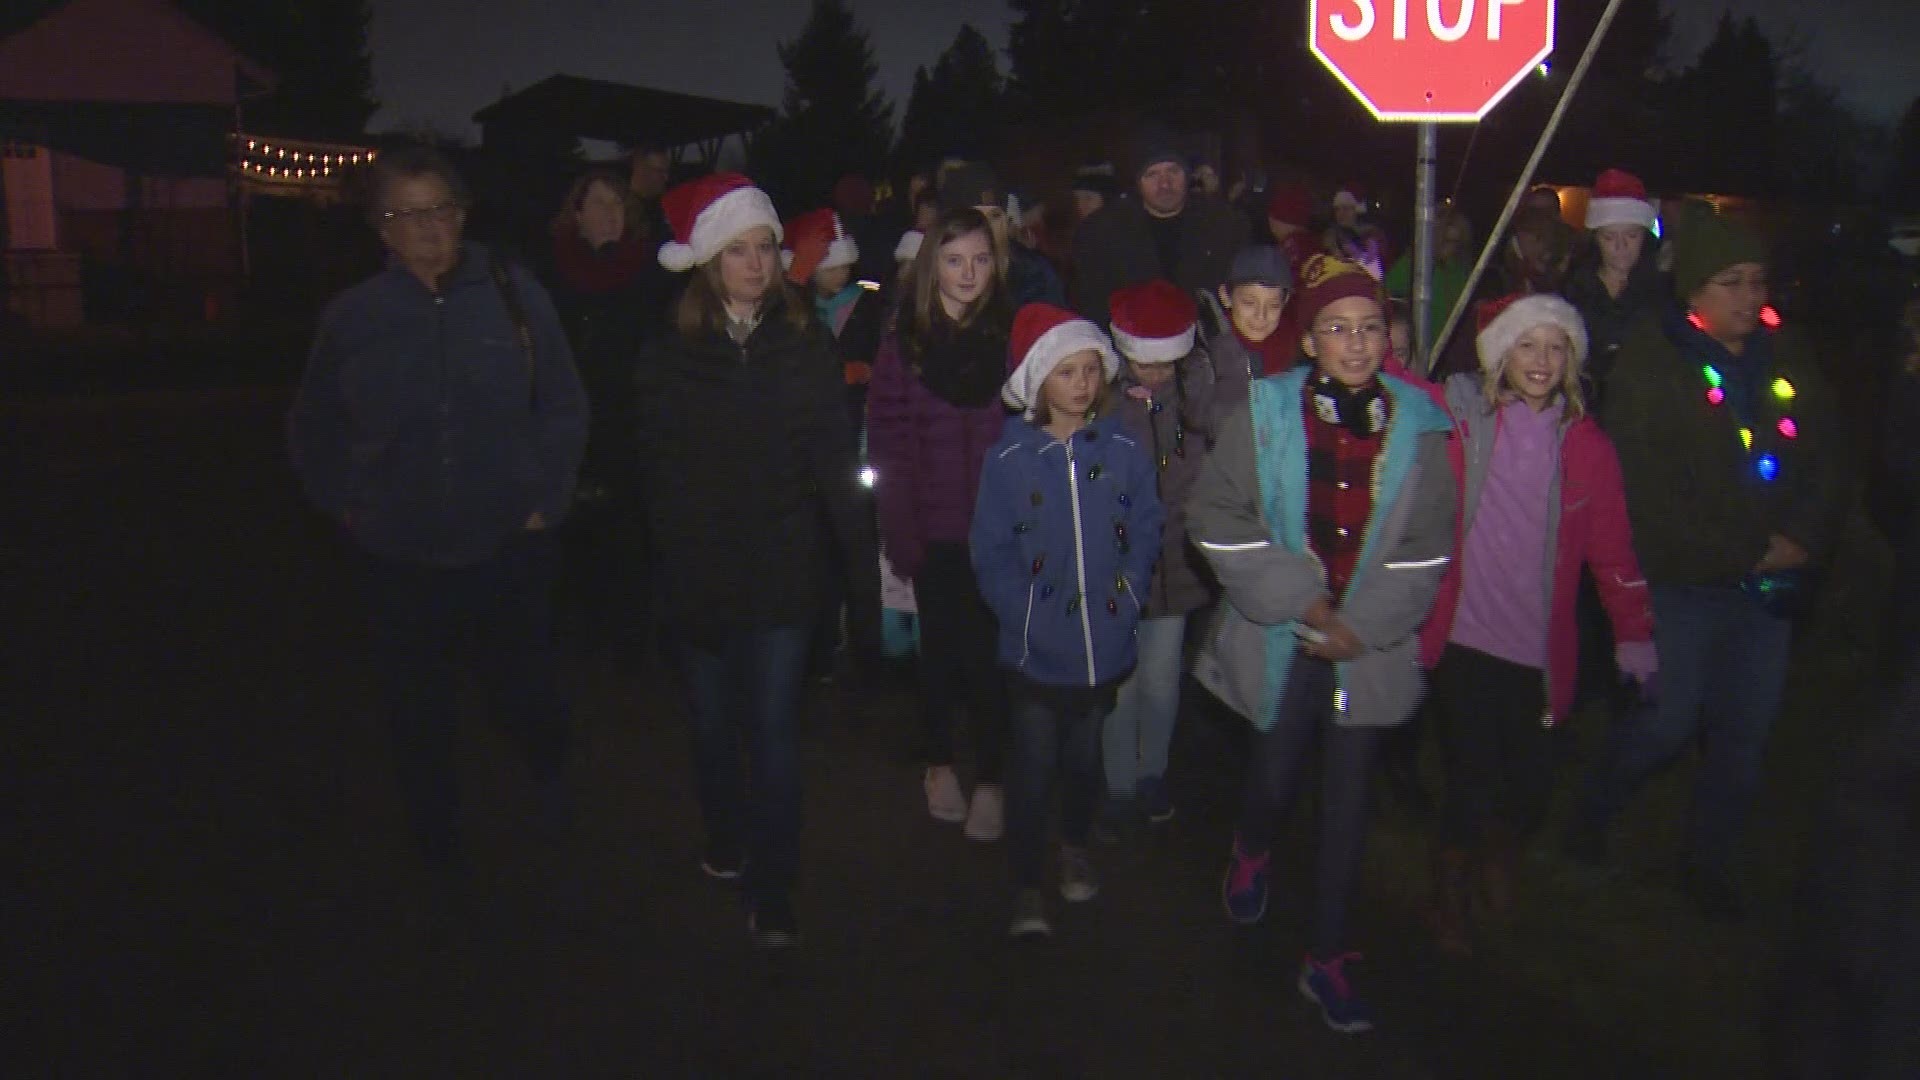 Vancouver students surprised their teacher battling cancer with Christmas carols.